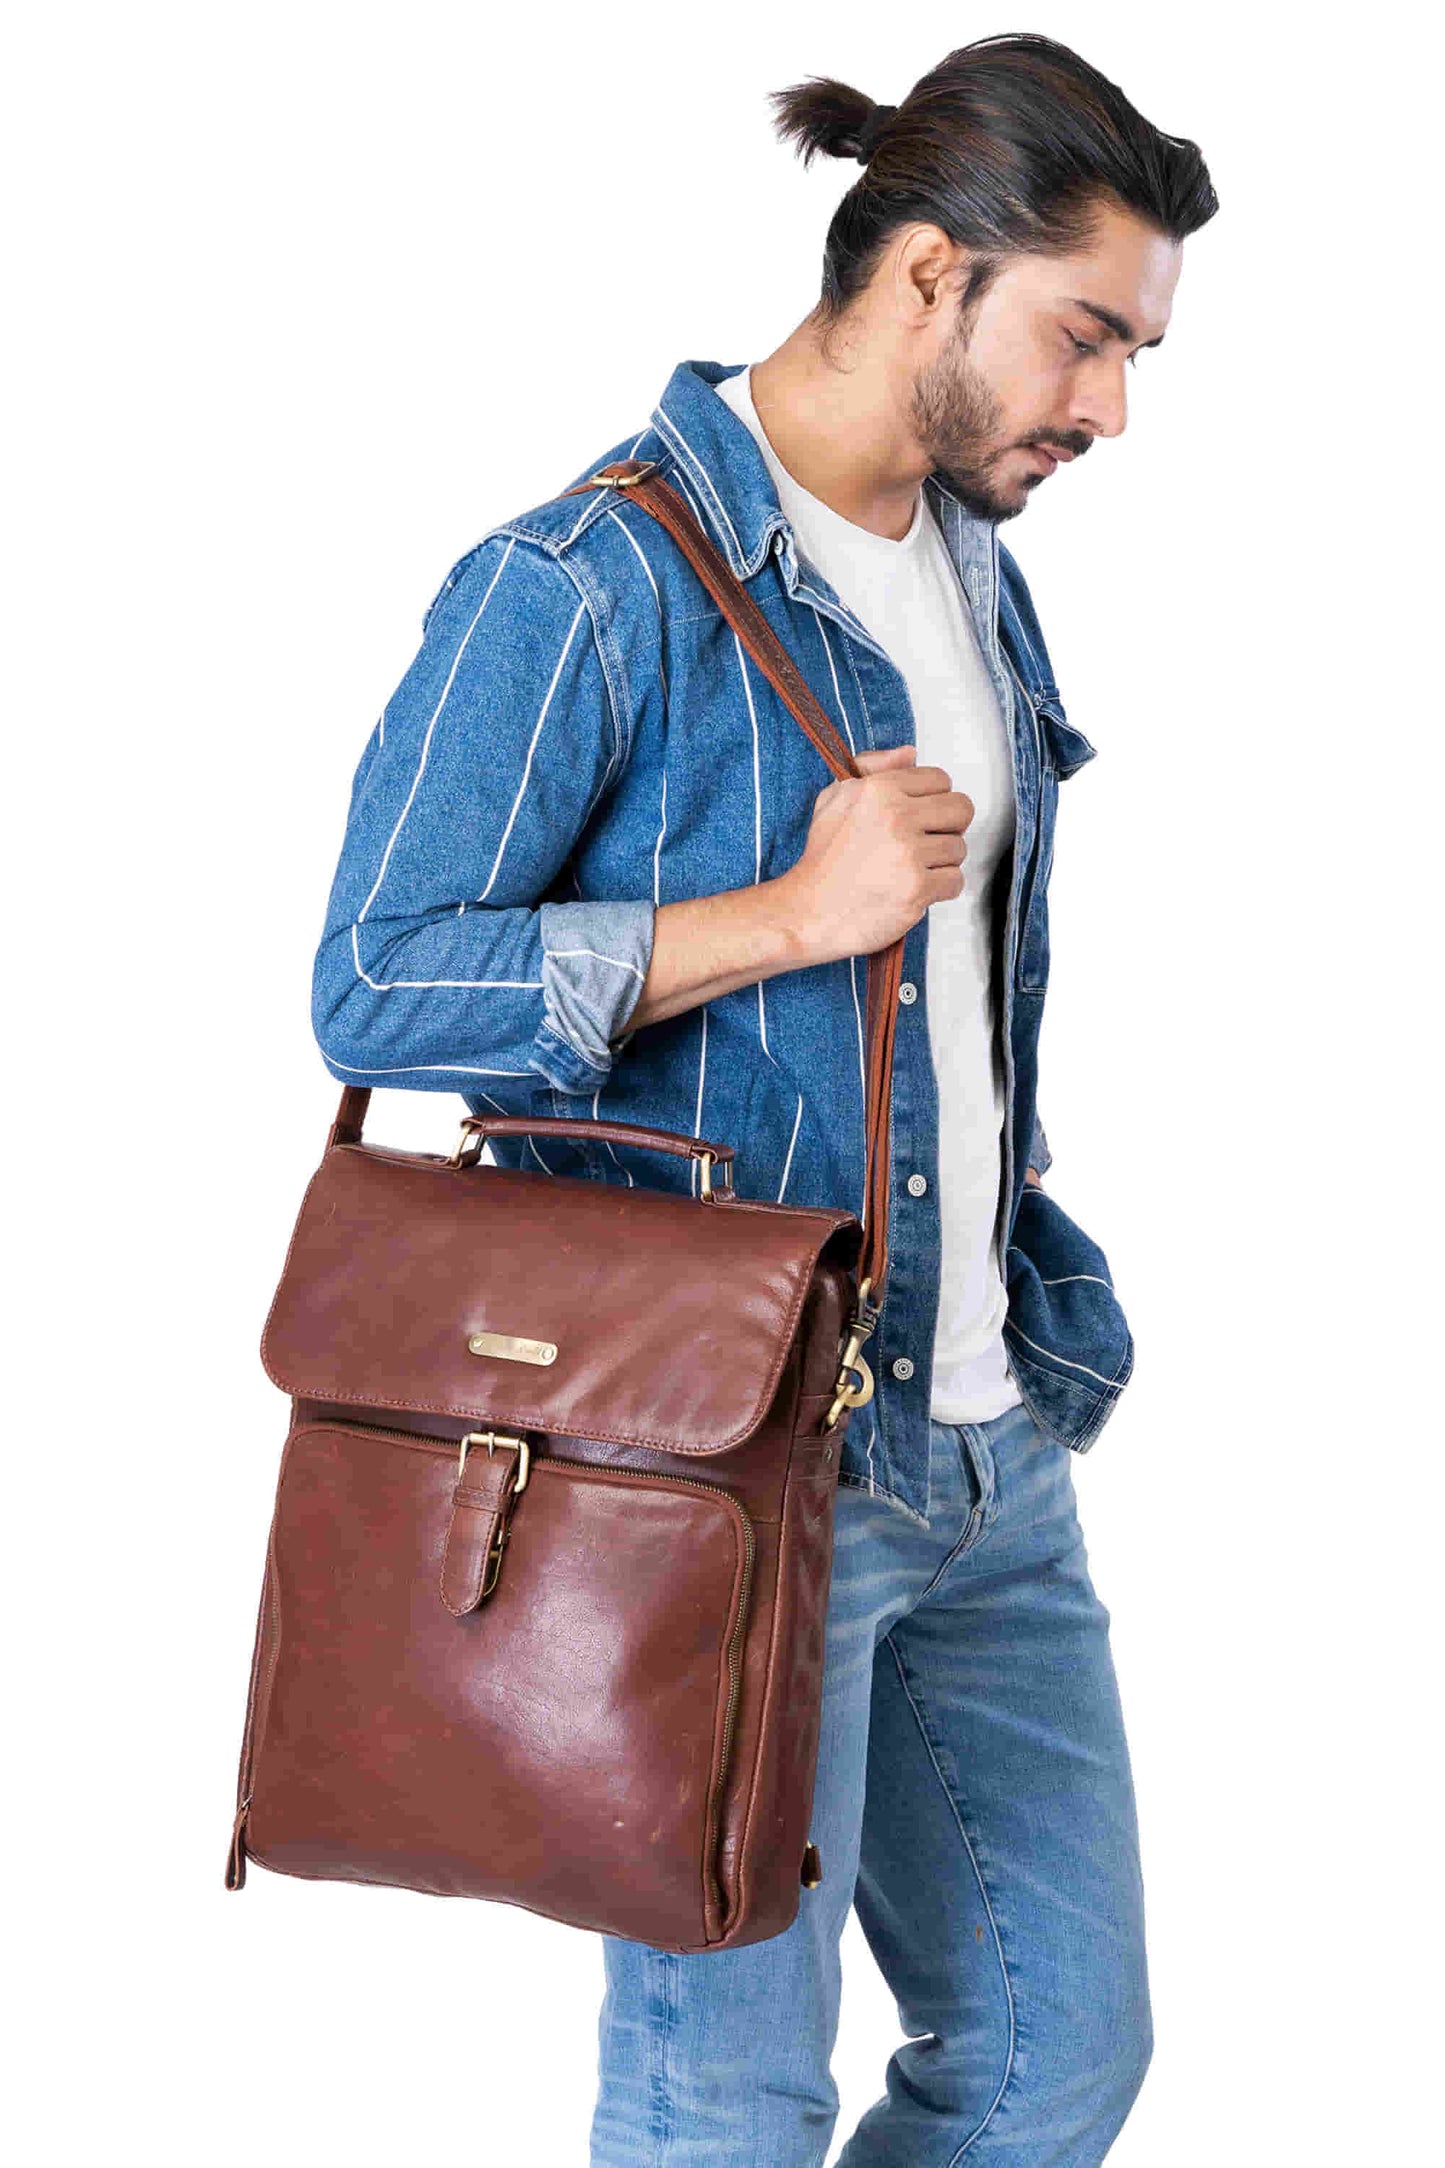 Style n Craft 392600 Cross Body Messenger Bag & Backpack in Full Grain Dark Brown Vintage Leather - in use as a shoulder messenger bag - another view